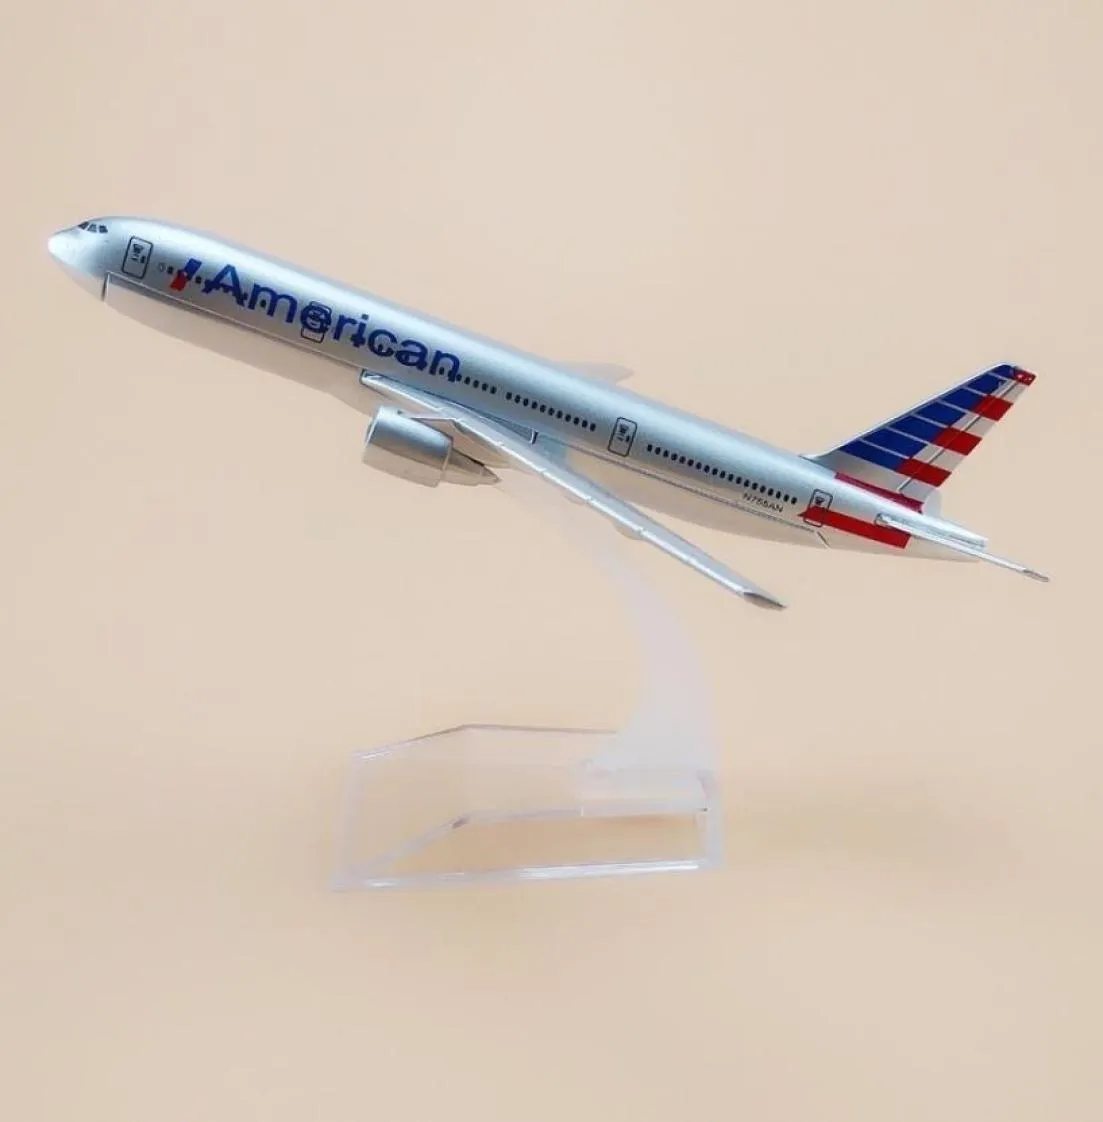 Alloy Metal Air American B777 AA Airlines Airplane Model Boeing 777 Plane Diecast Aircraft Kids Gifts 16cm Y2001049776278